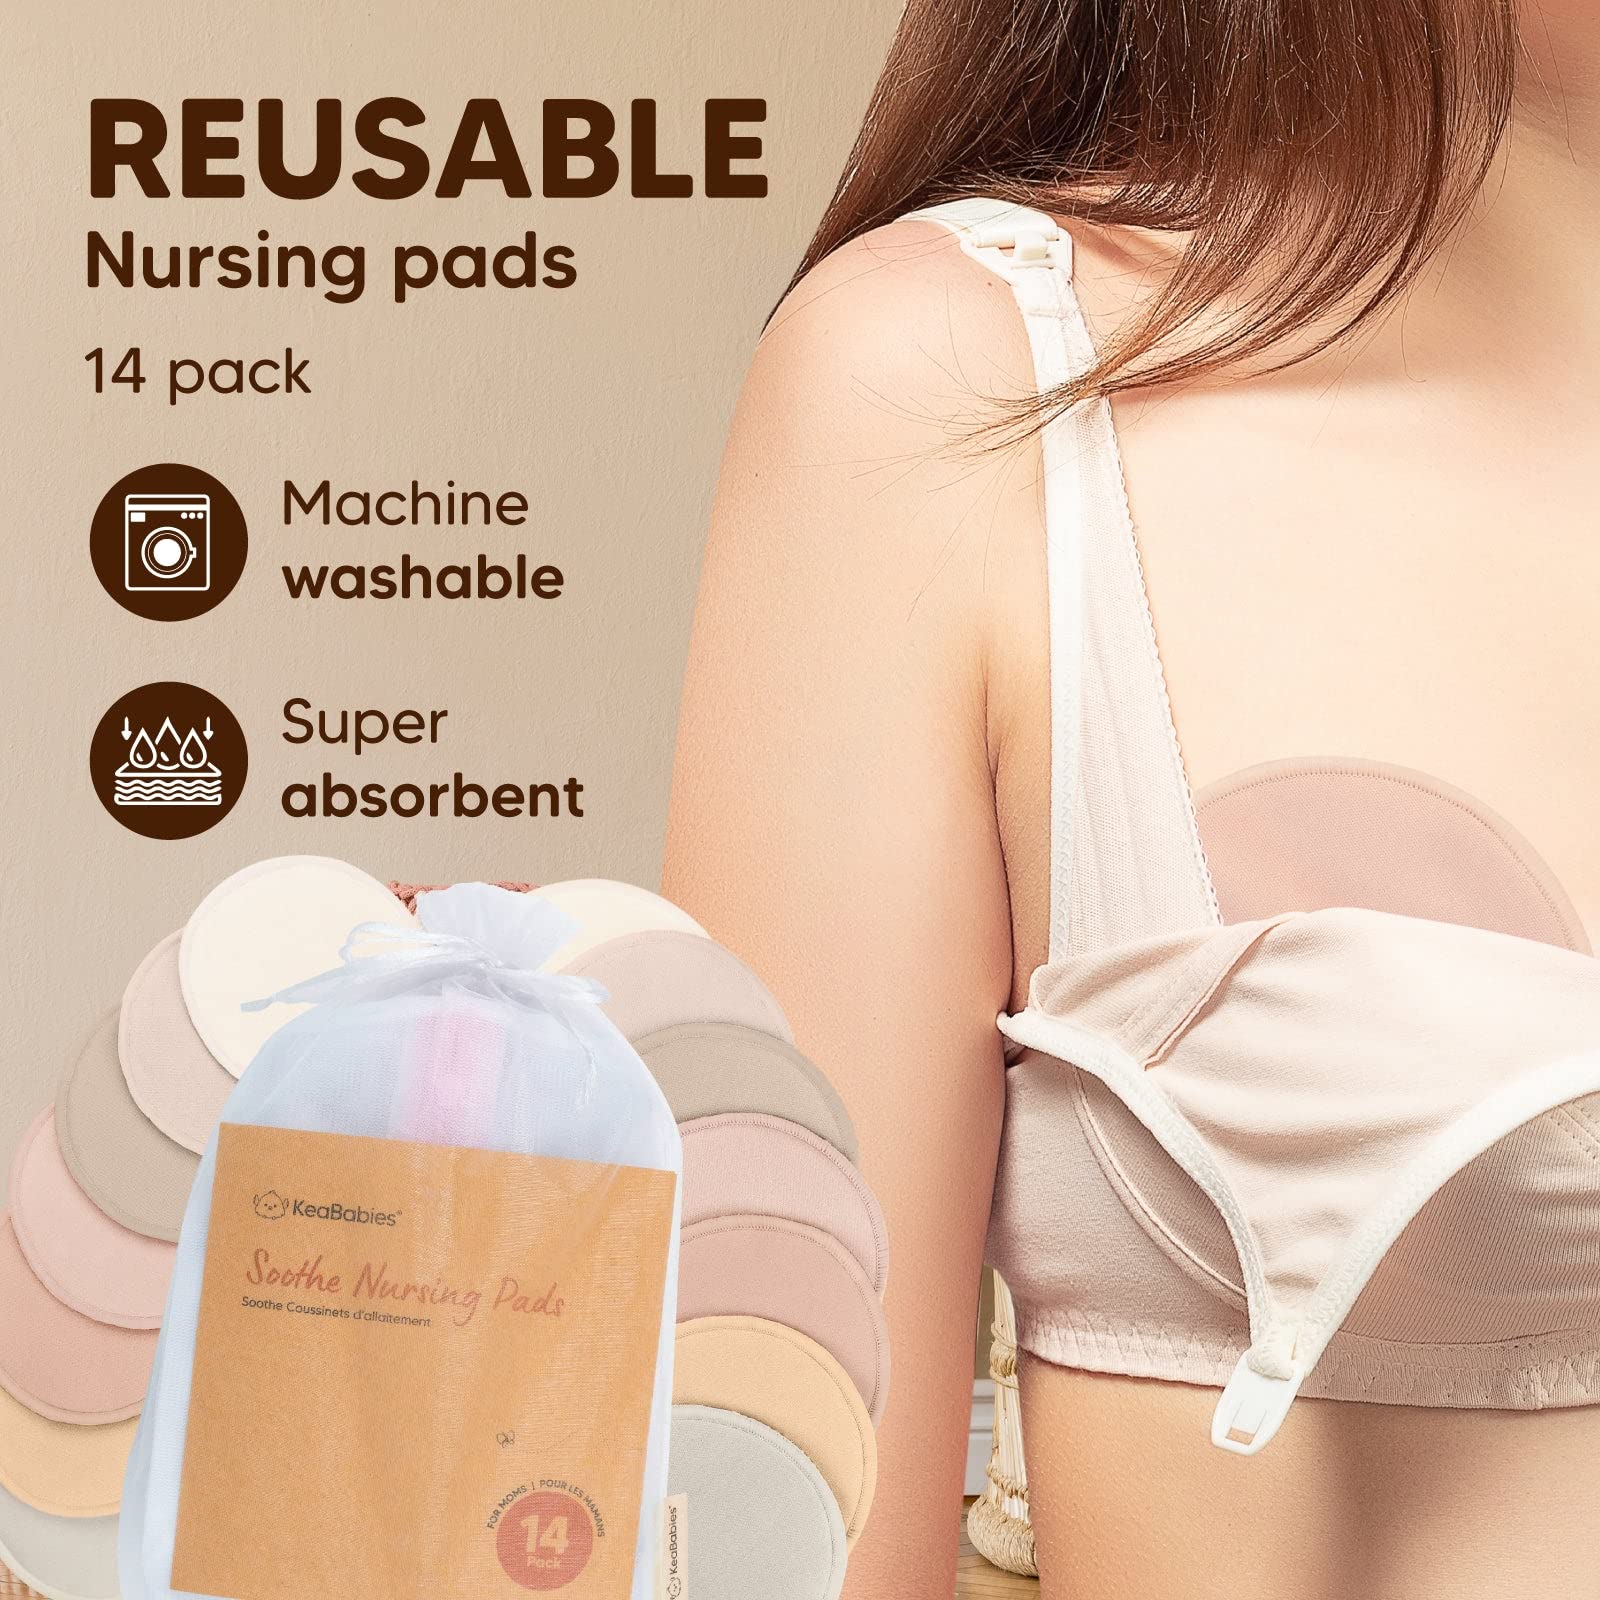 Reusable Nursing Pads for Breastfeeding, 14-Pack - 4-Layers Organic Bamboo Nursing Pads - Breastfeeding Pads - Washable Breast Pads - Natural Bamboo Maternity Pads (Neutrals, Large 4.8